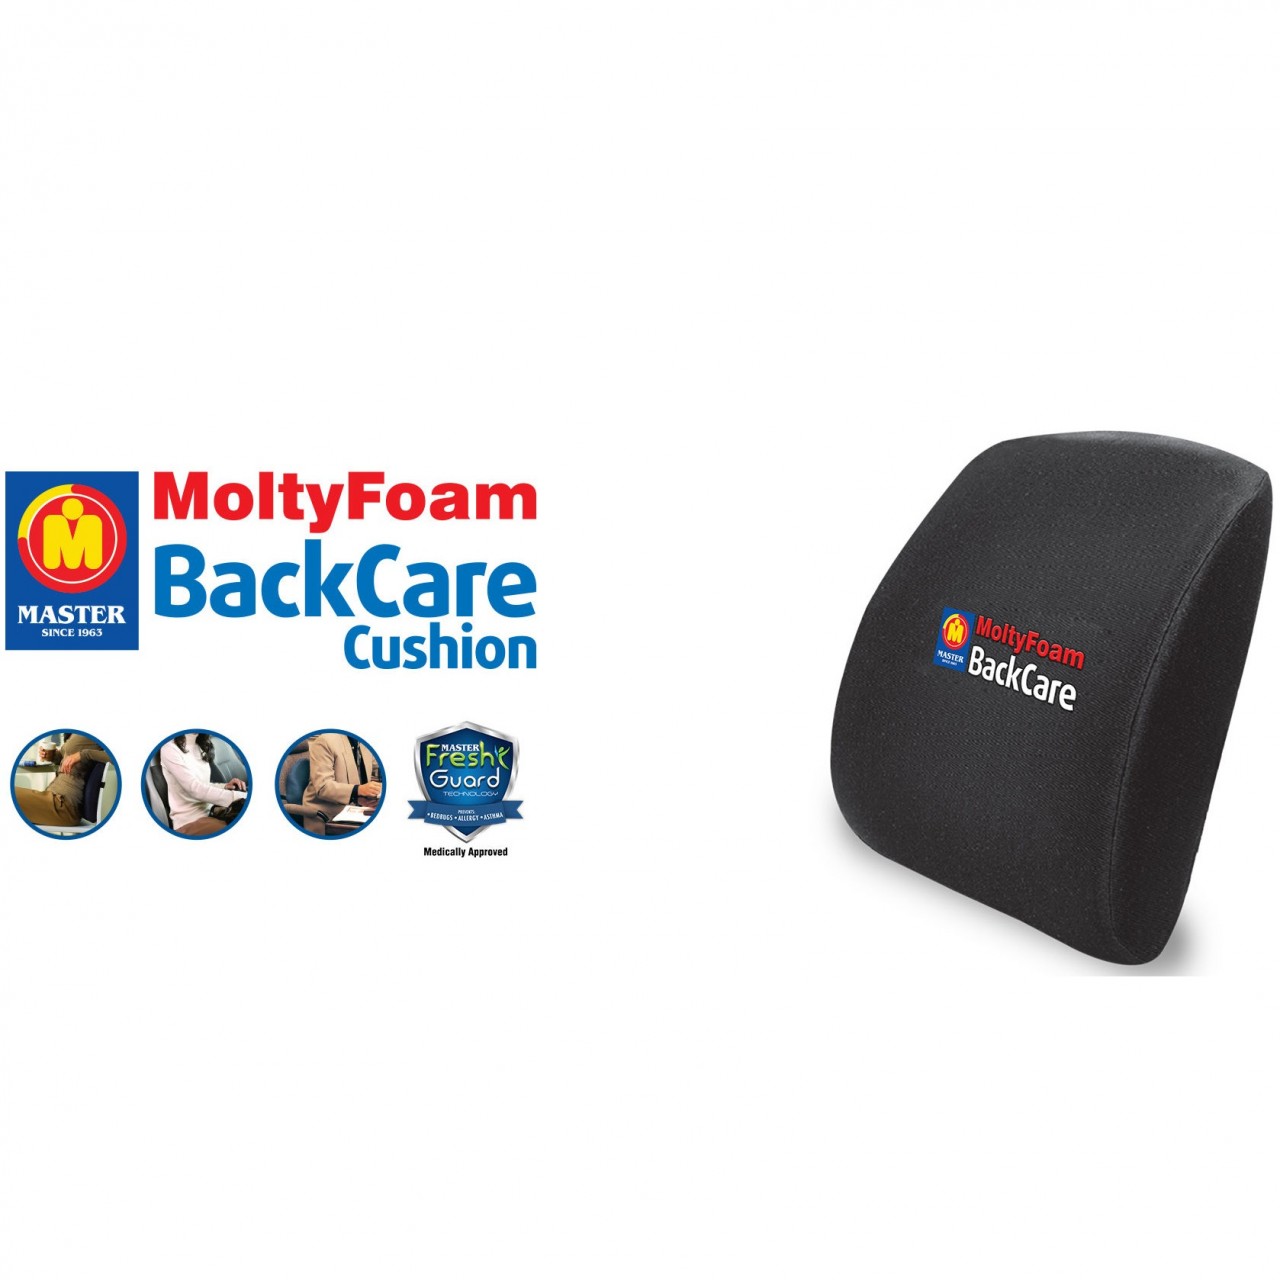 MoltyFoam Back Care Cushion For Home & Office Use